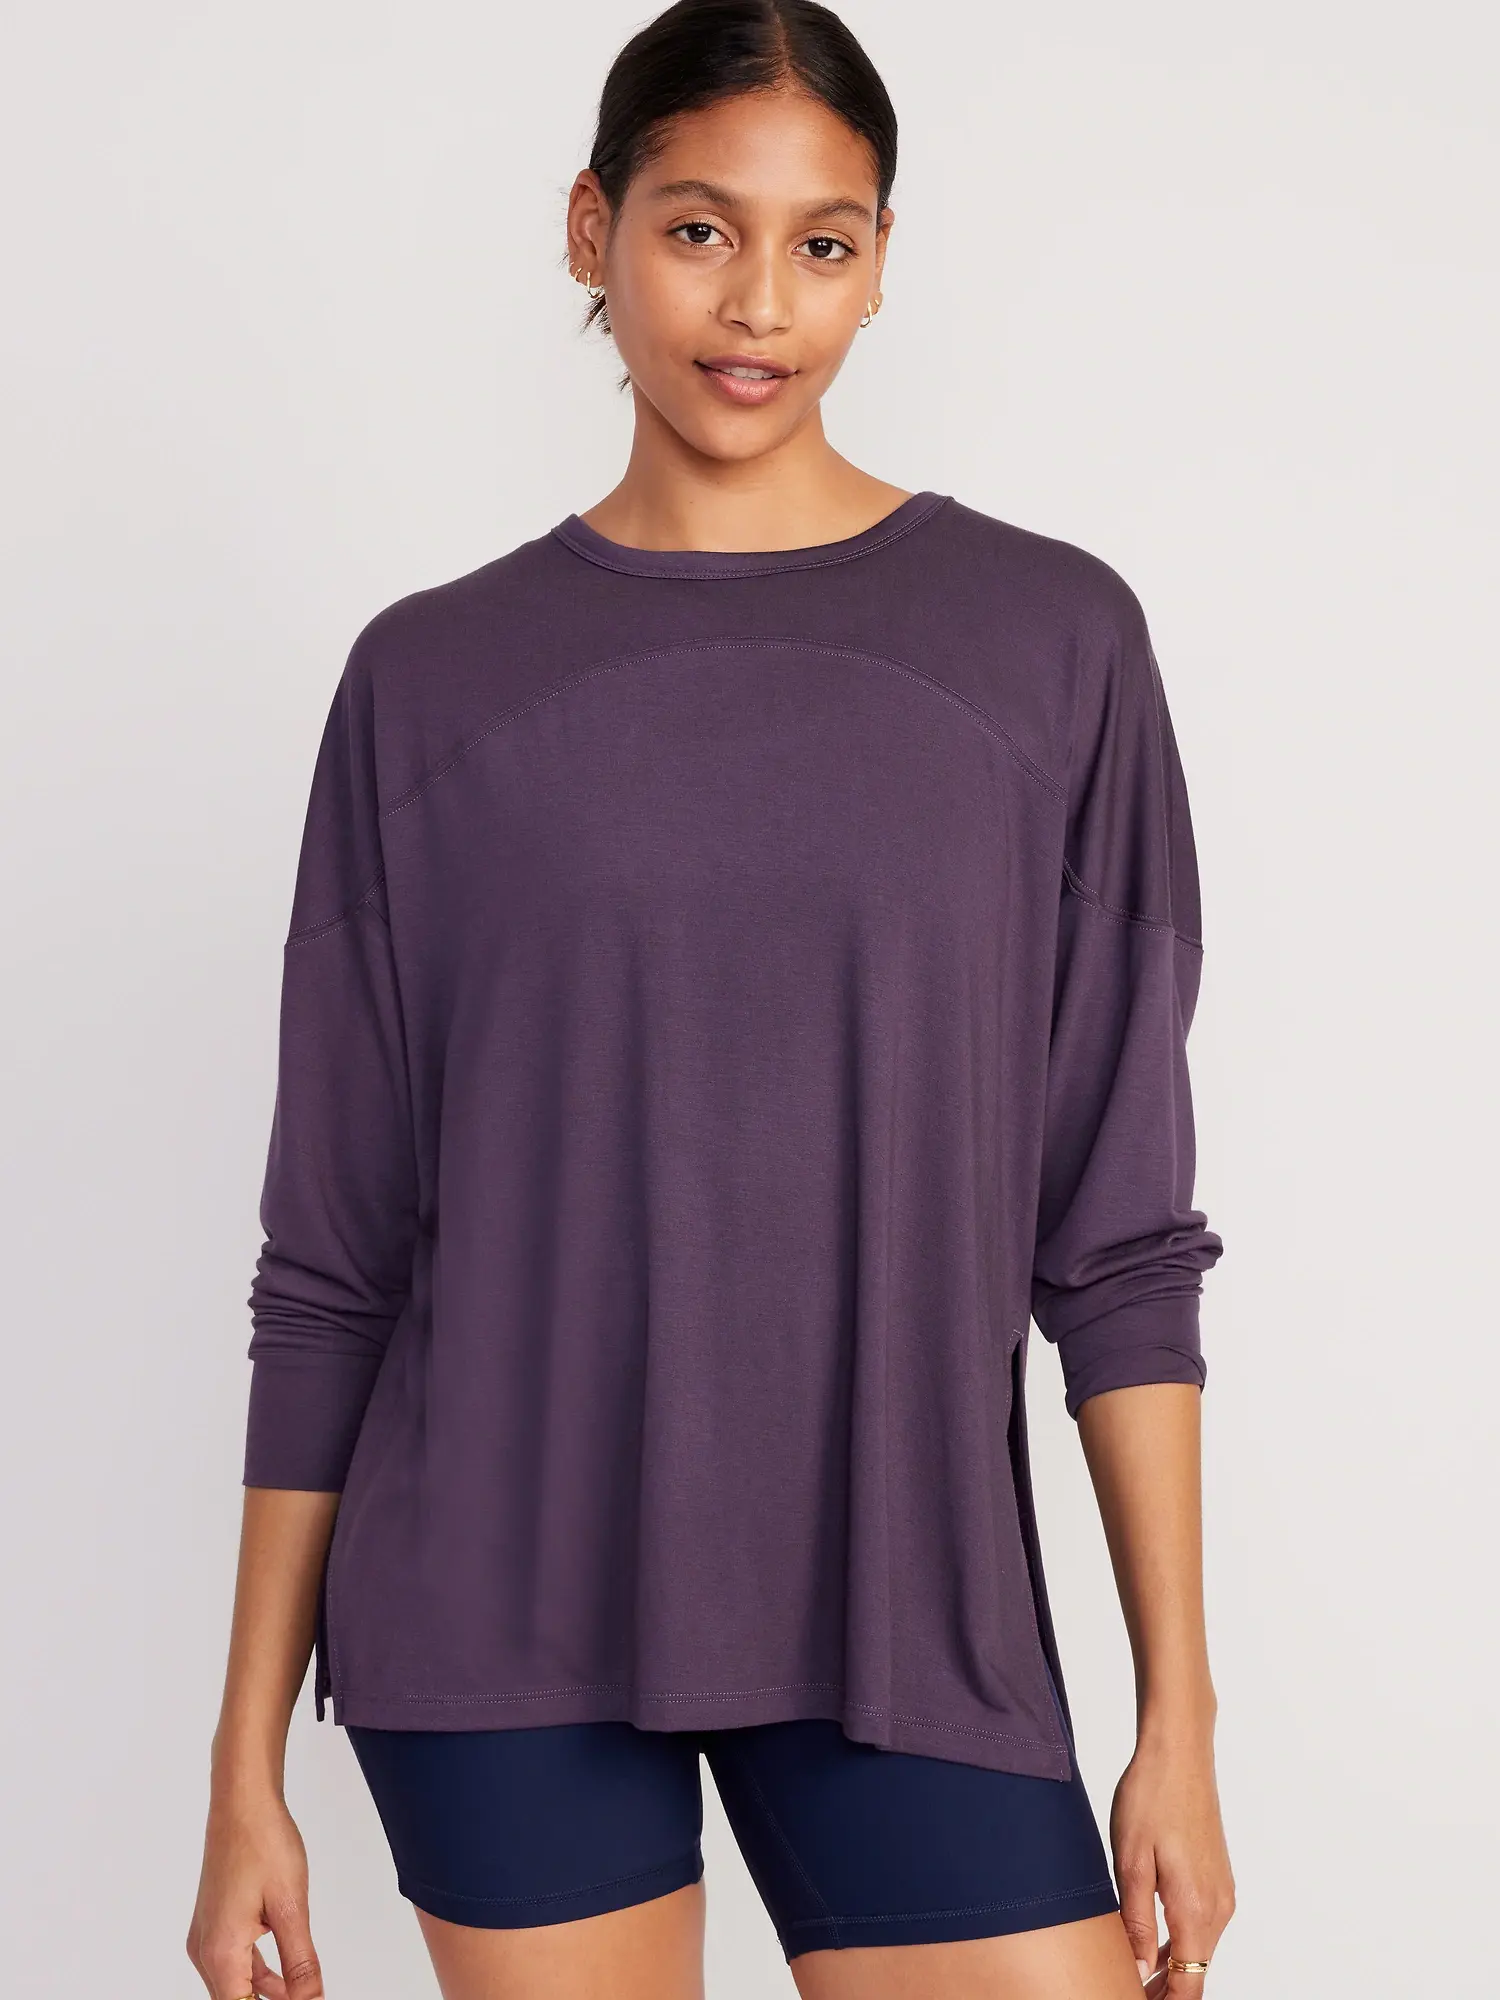 Old Navy Oversized UltraLite All-Day Performance Tunic for Women purple. 1